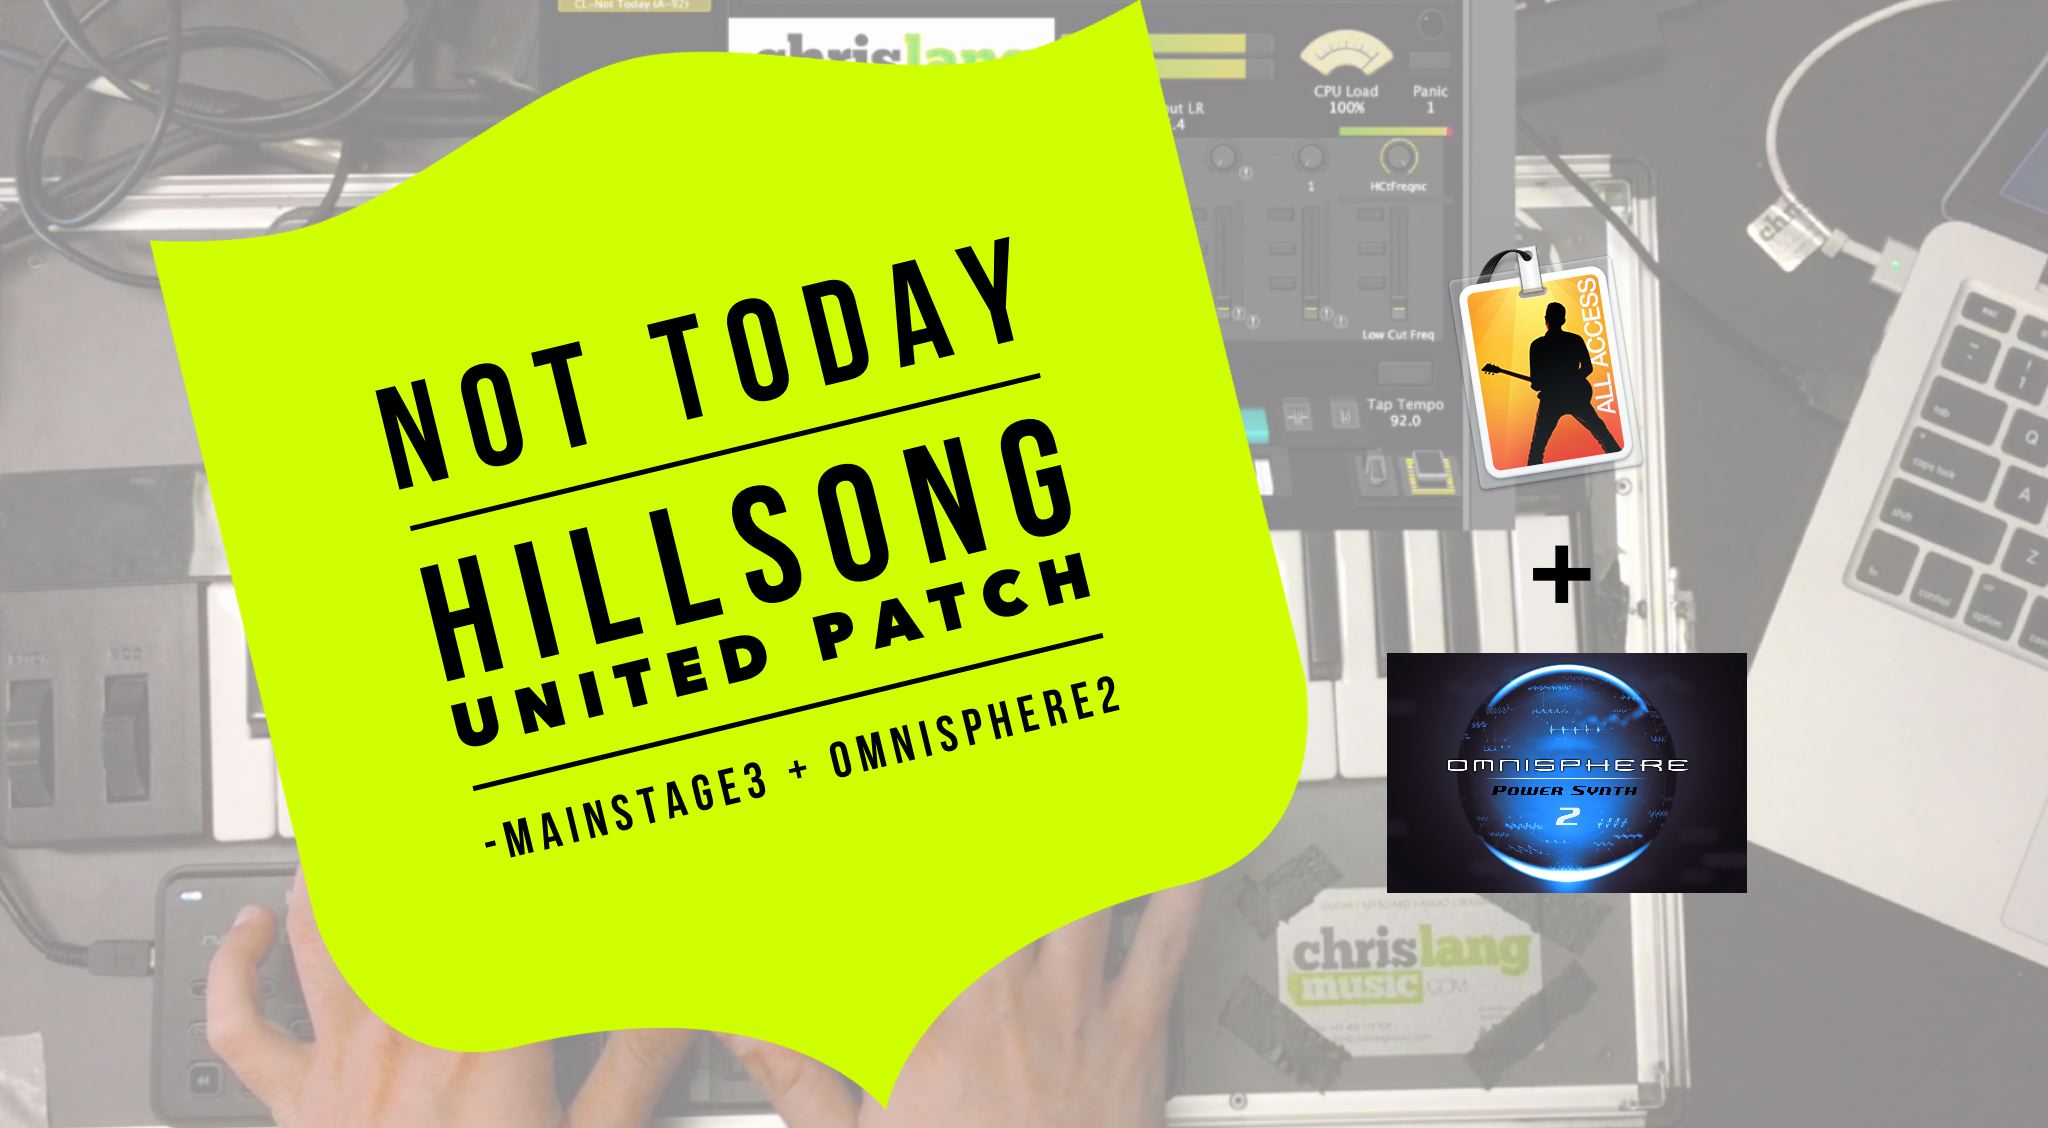 NOT TODAY - Hillsong United